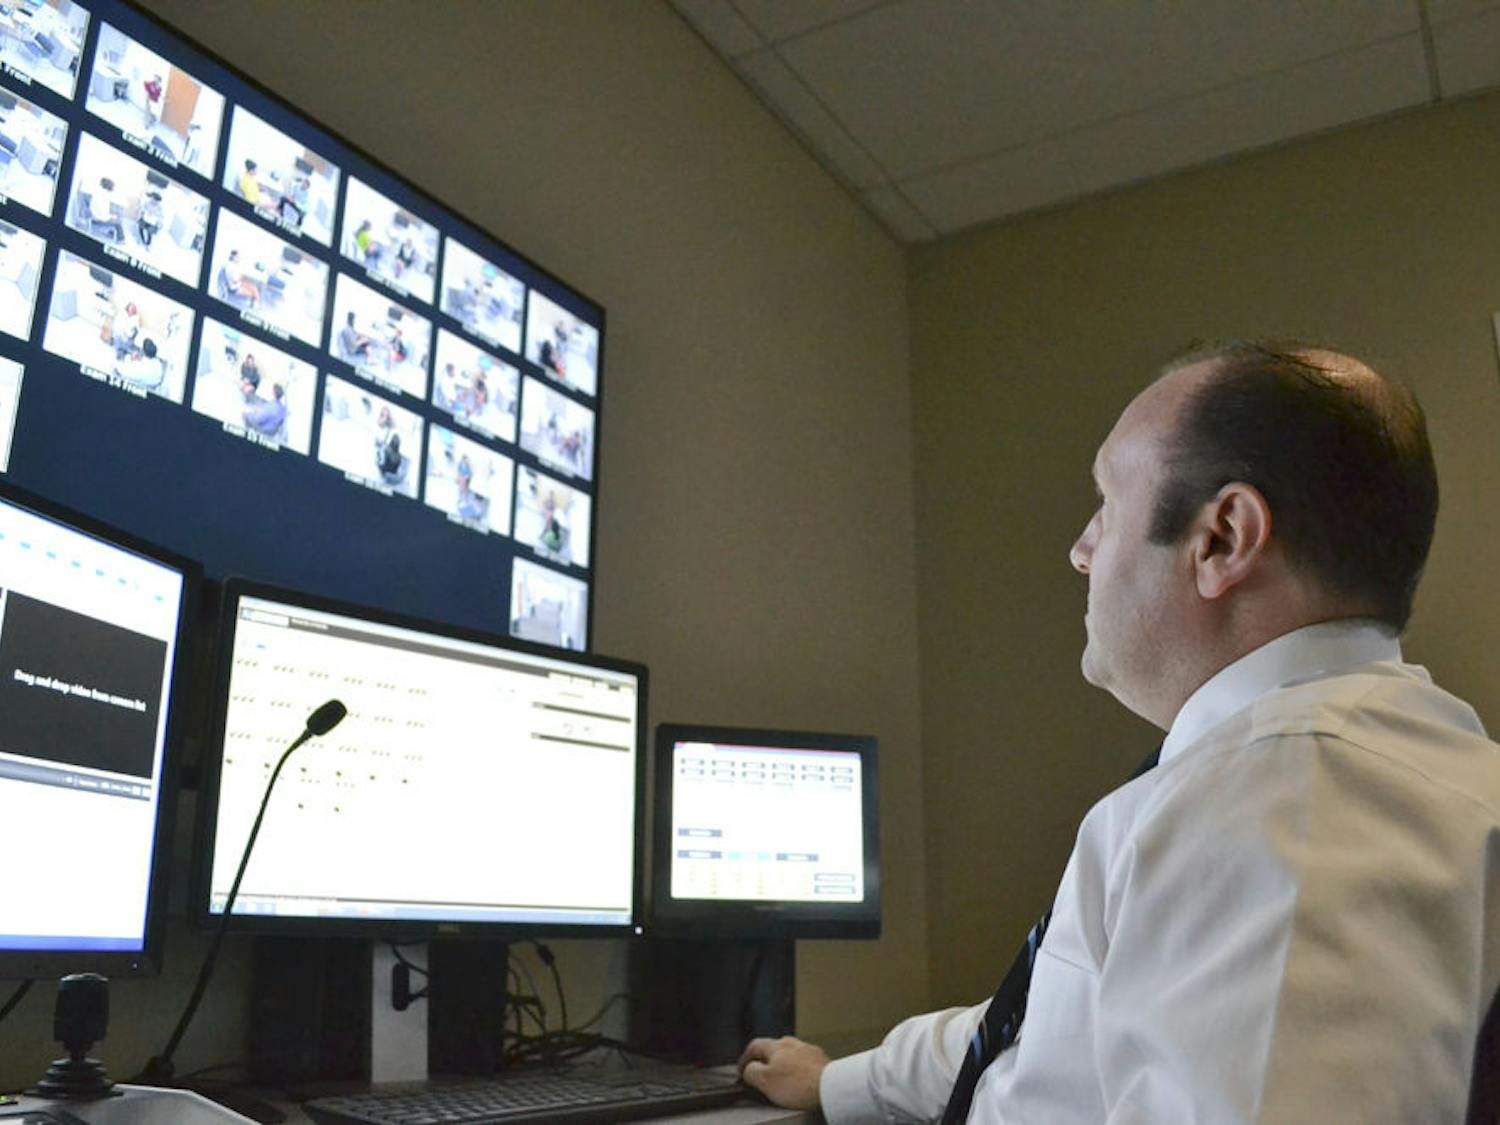 Dan Pollock, the head internet technician at the Anaclerio Learning and Assessment Center, gazes upon 18 screens streaming live footage of first year medical students interacting with volunteers acting as patients Aug. 28, 2015. Pollock’s voice, jokingly called the voice of “God,” can be heard in the halls of the center instructing students during their lesson.